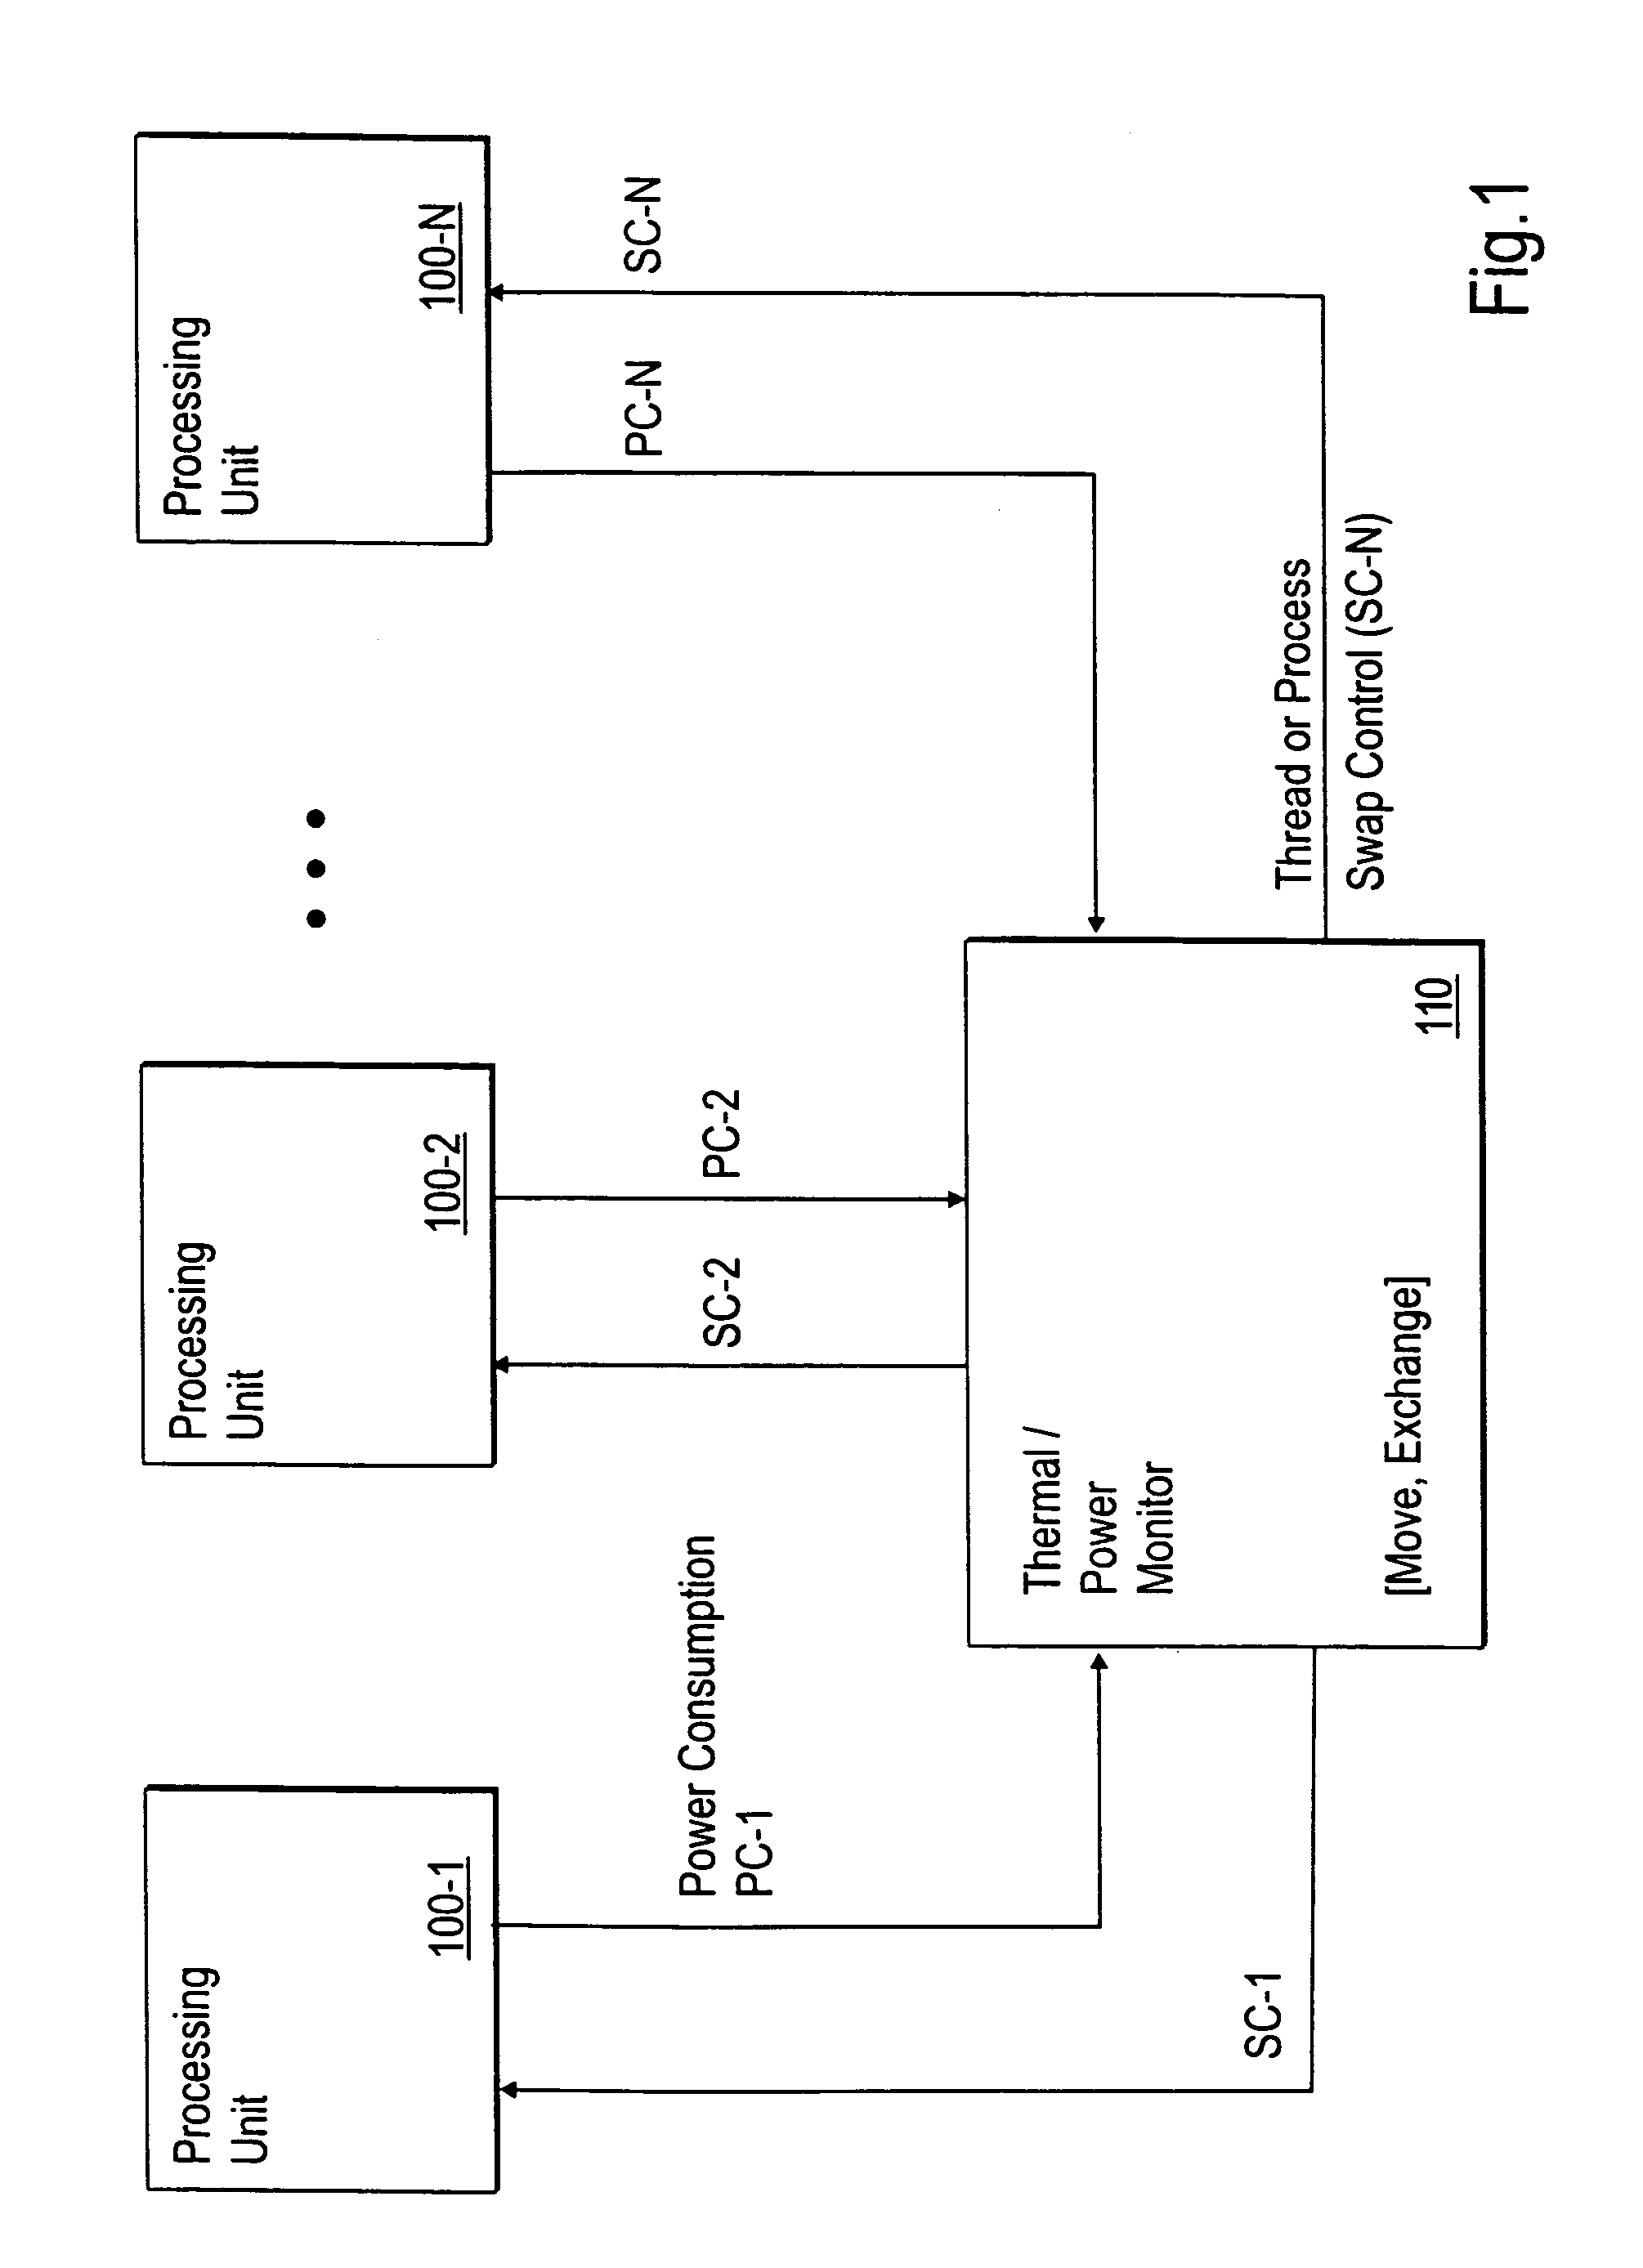 Distribution of processing activity in a multiple core microprocessor